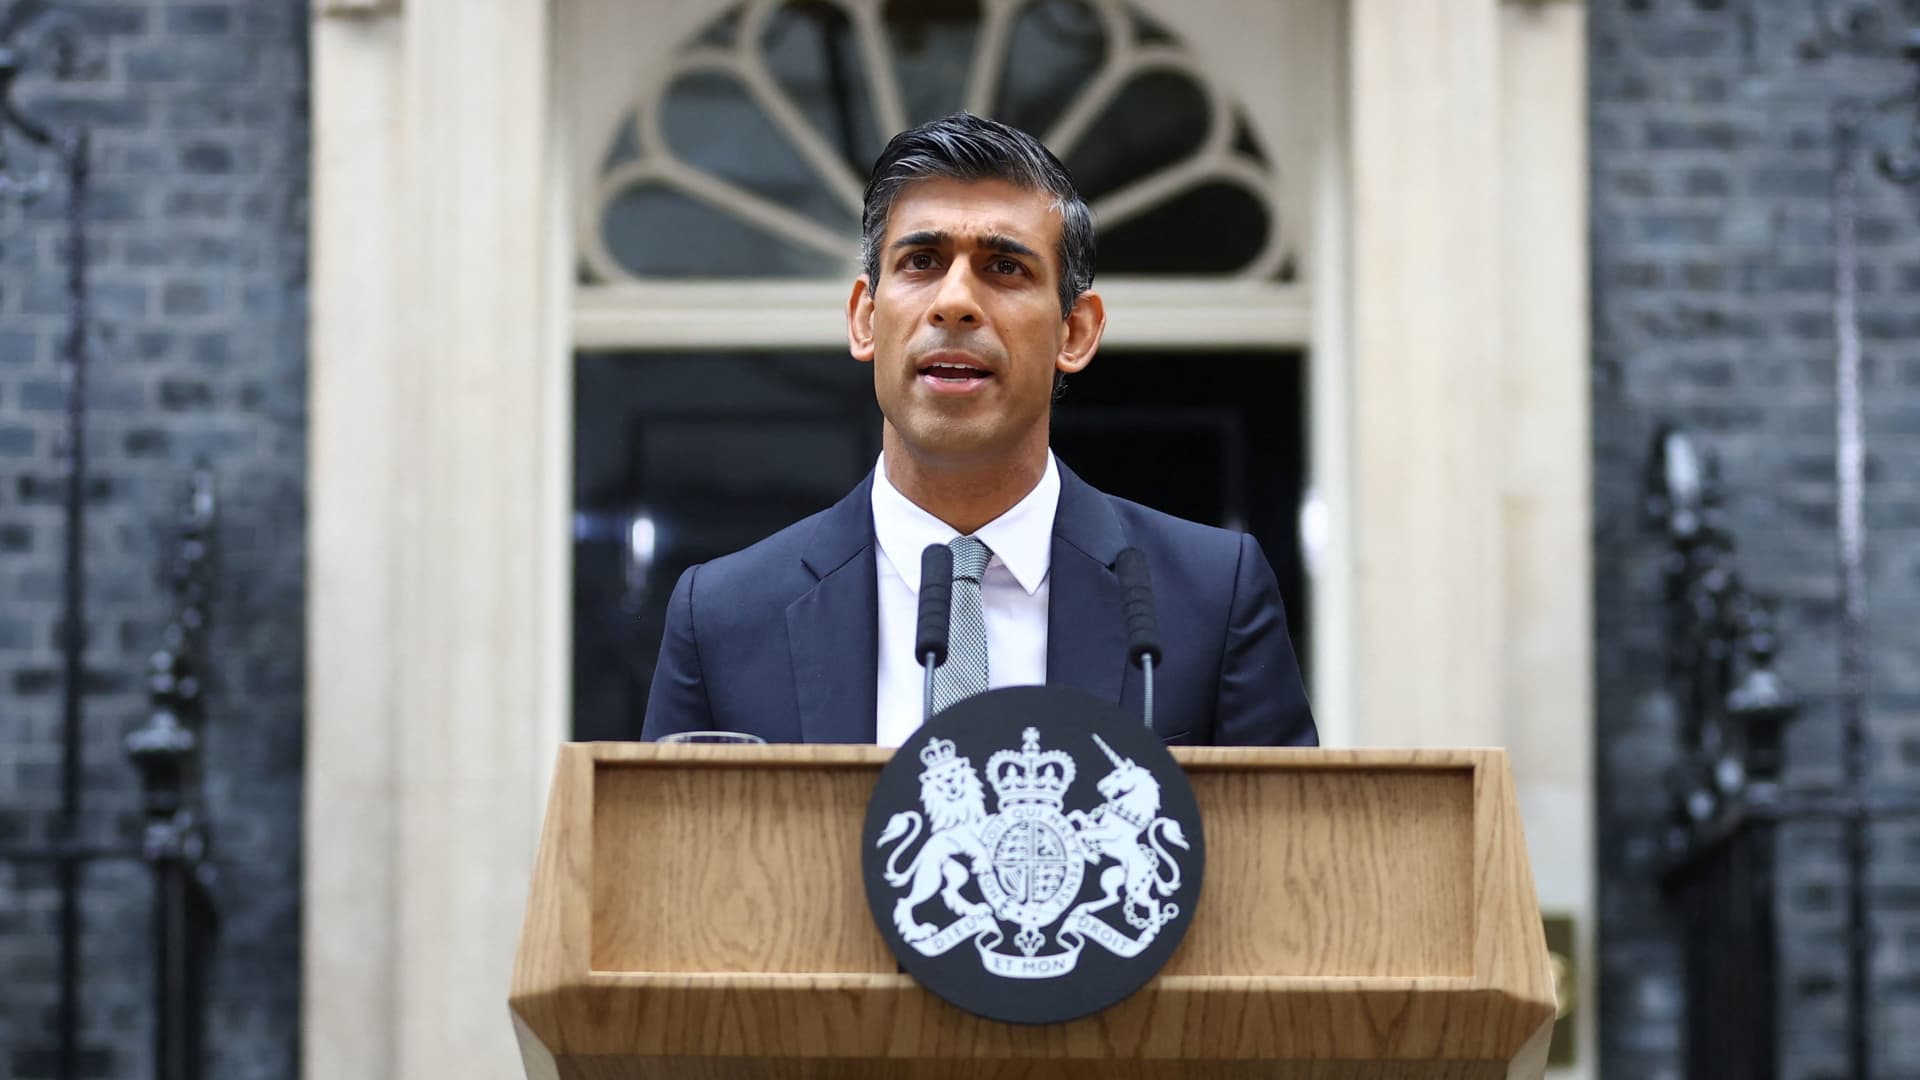 Rishi Sunak pledges to fix mistakes as he becomes UK PM